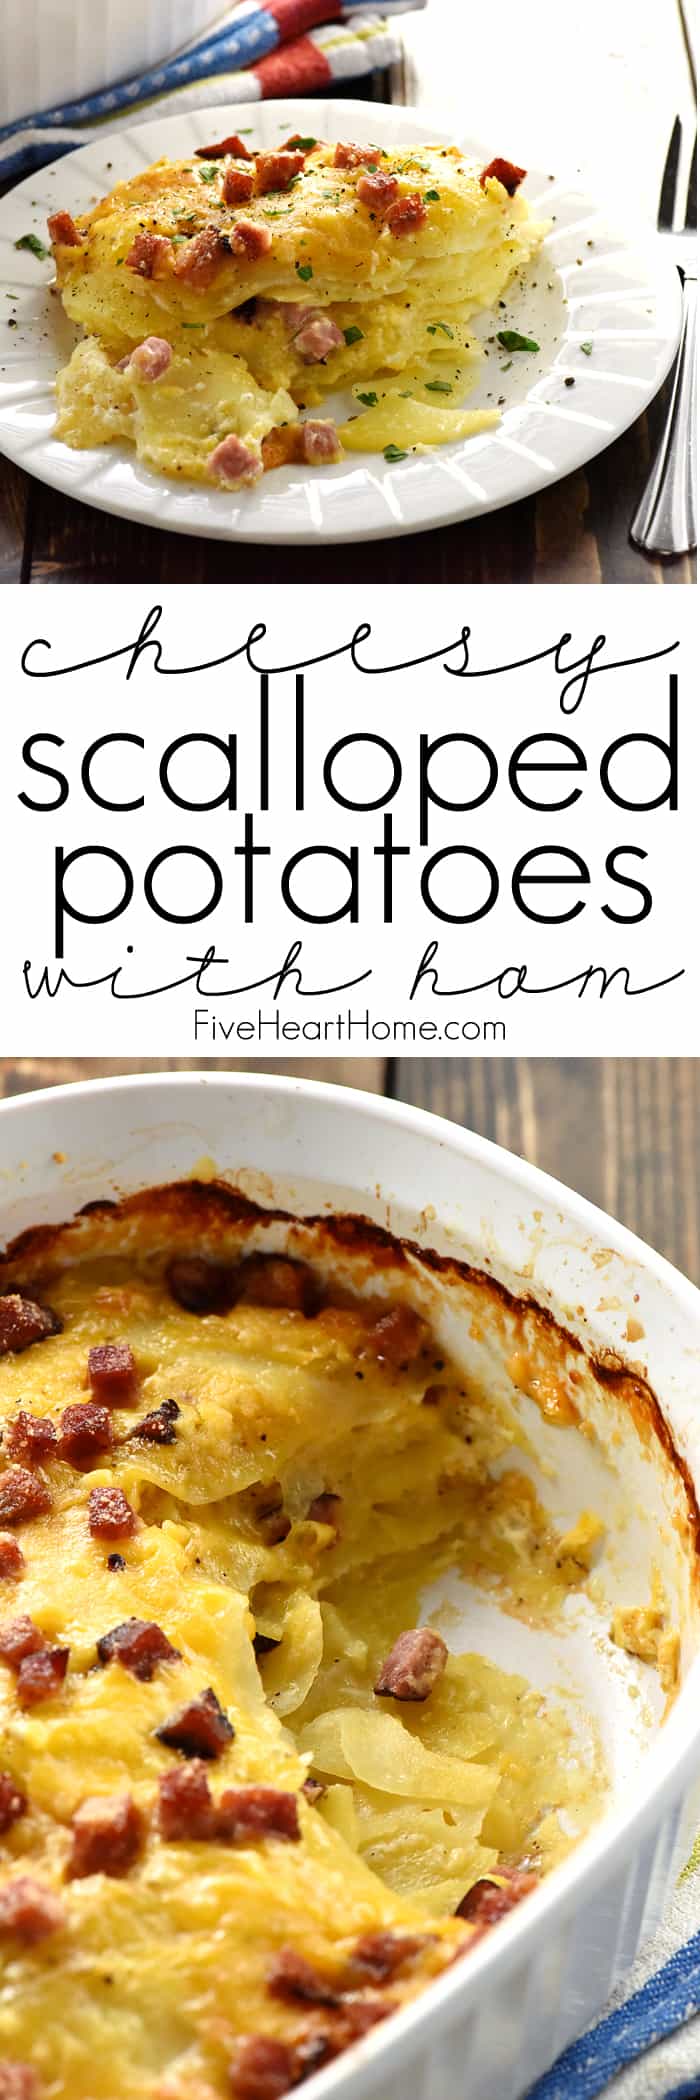 Cheesy Scalloped Potatoes with Ham with Collage and Text Overlay 